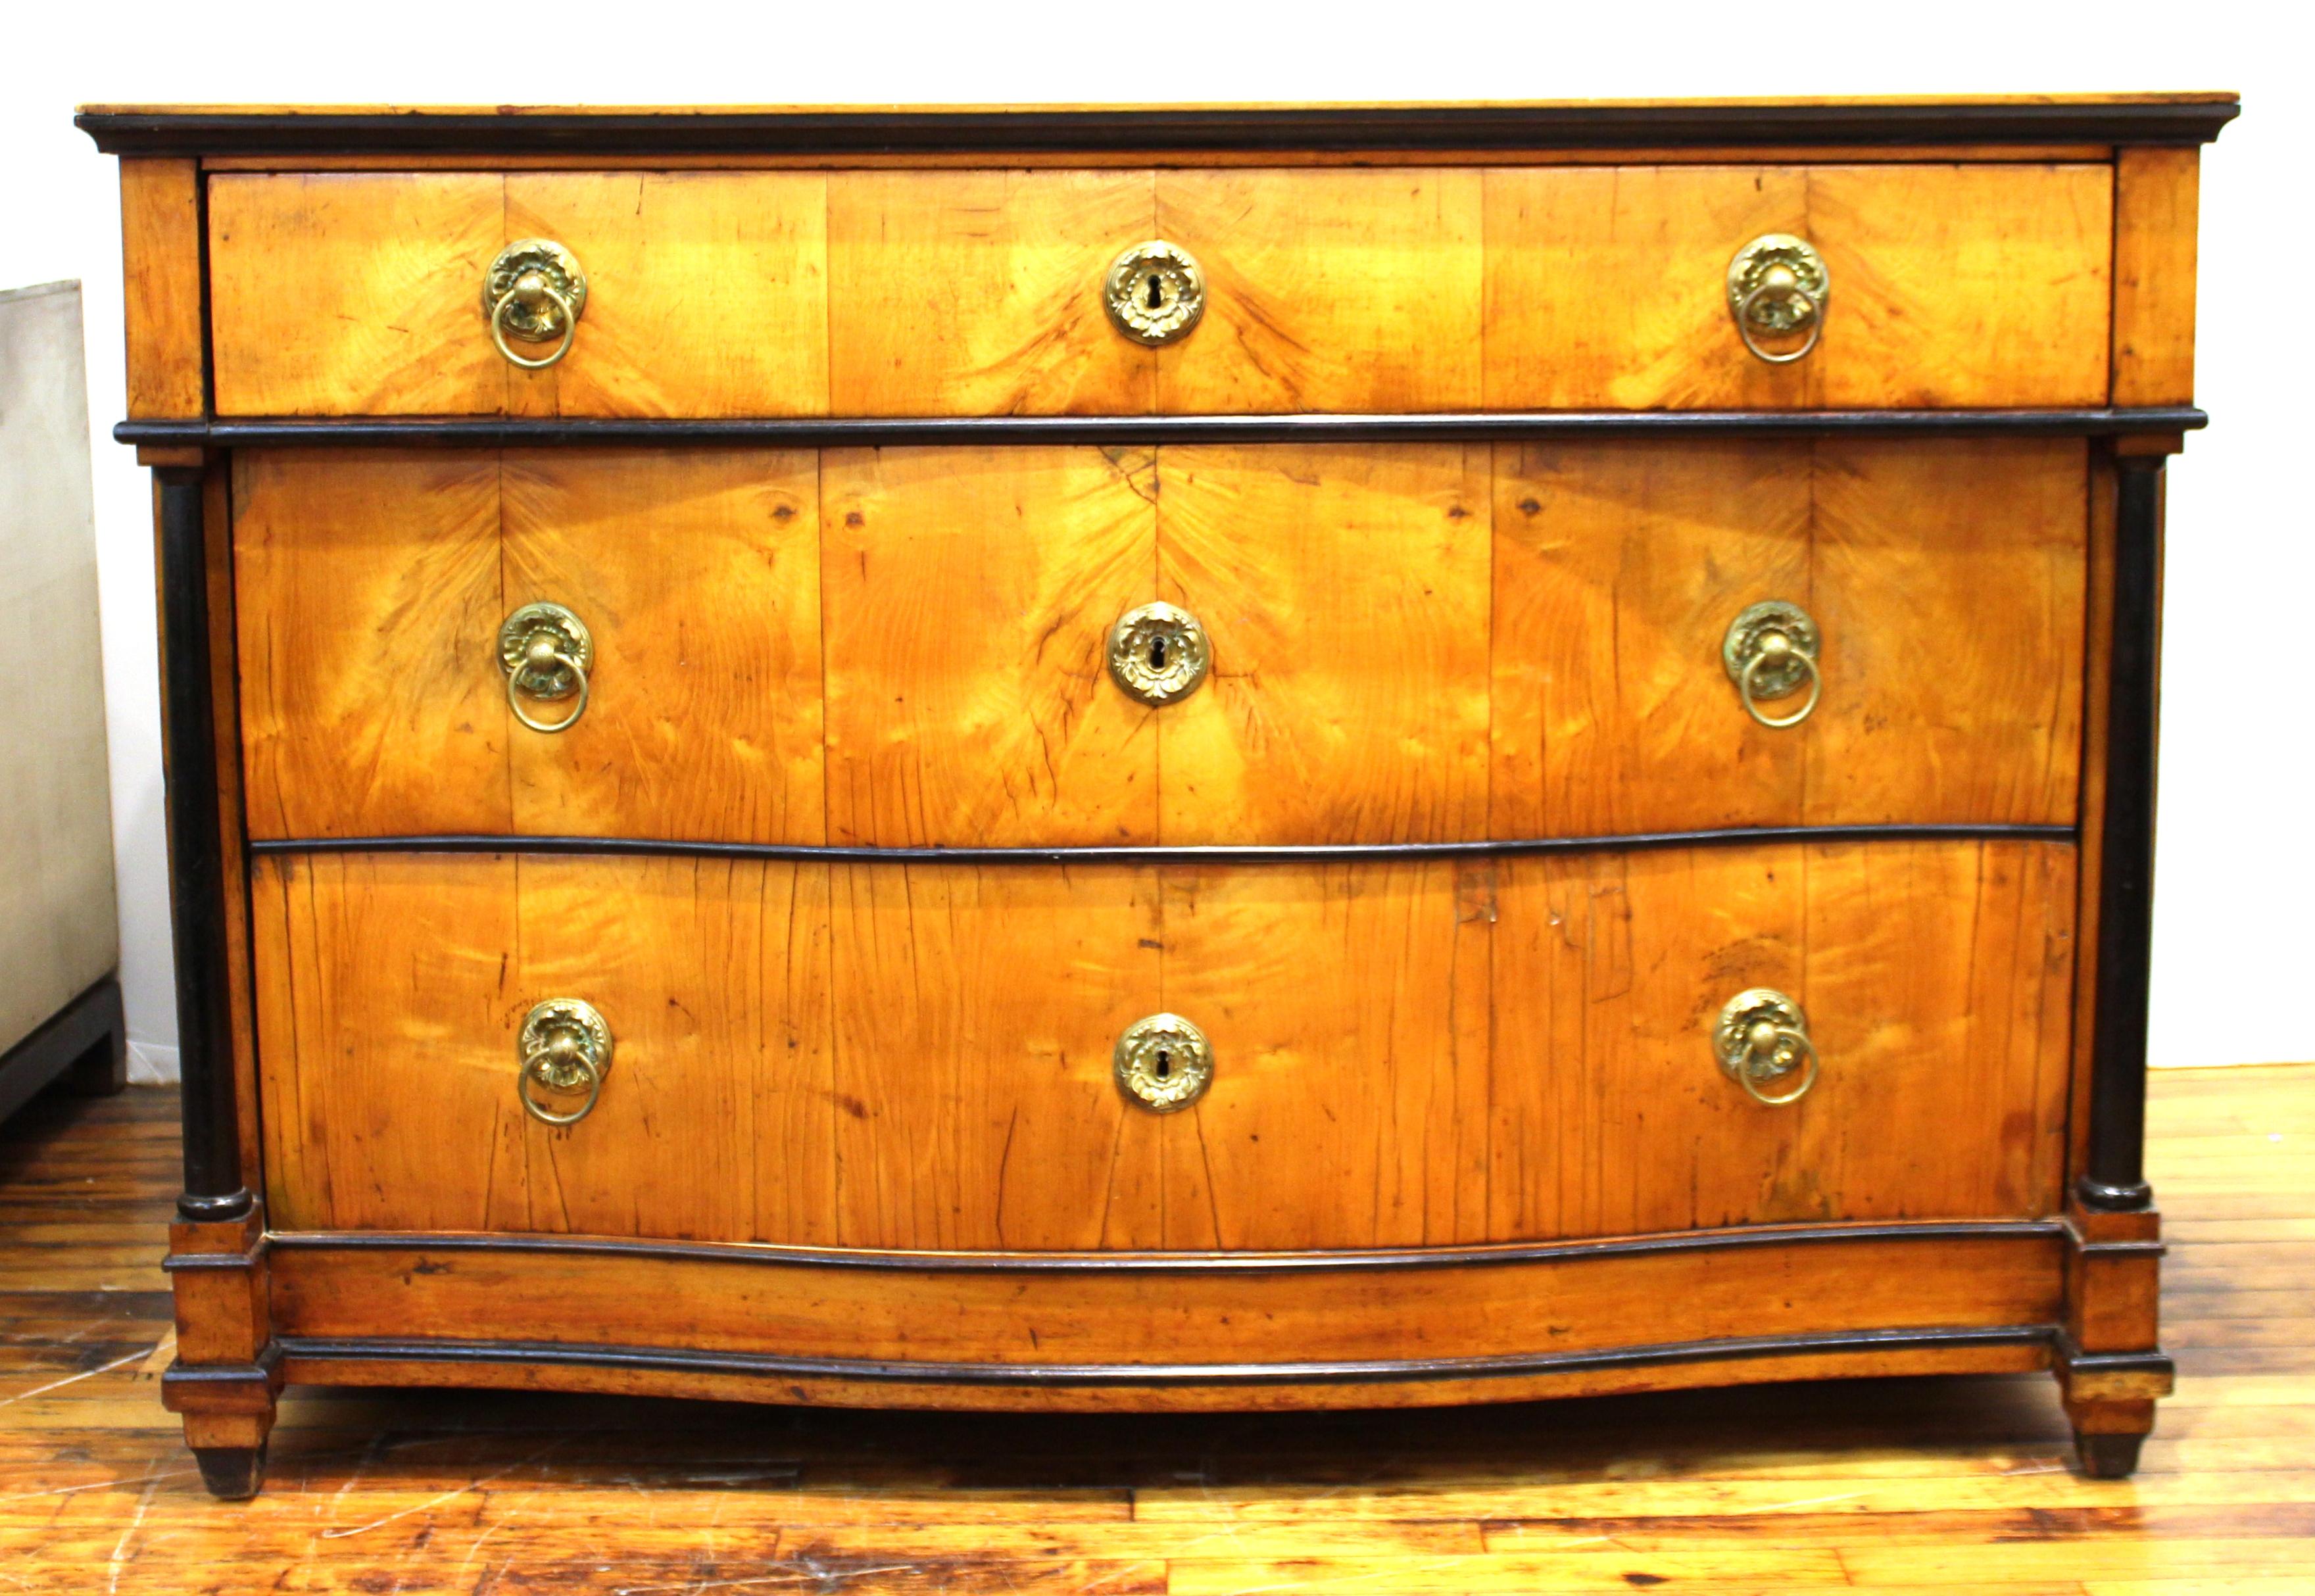 Large Biedermeier commode or chest of drawers with 3 individual drawers with metal embellishments and ebonized details. The piece was possibly made in Austria in the early 20th Century and is in good antique condition.